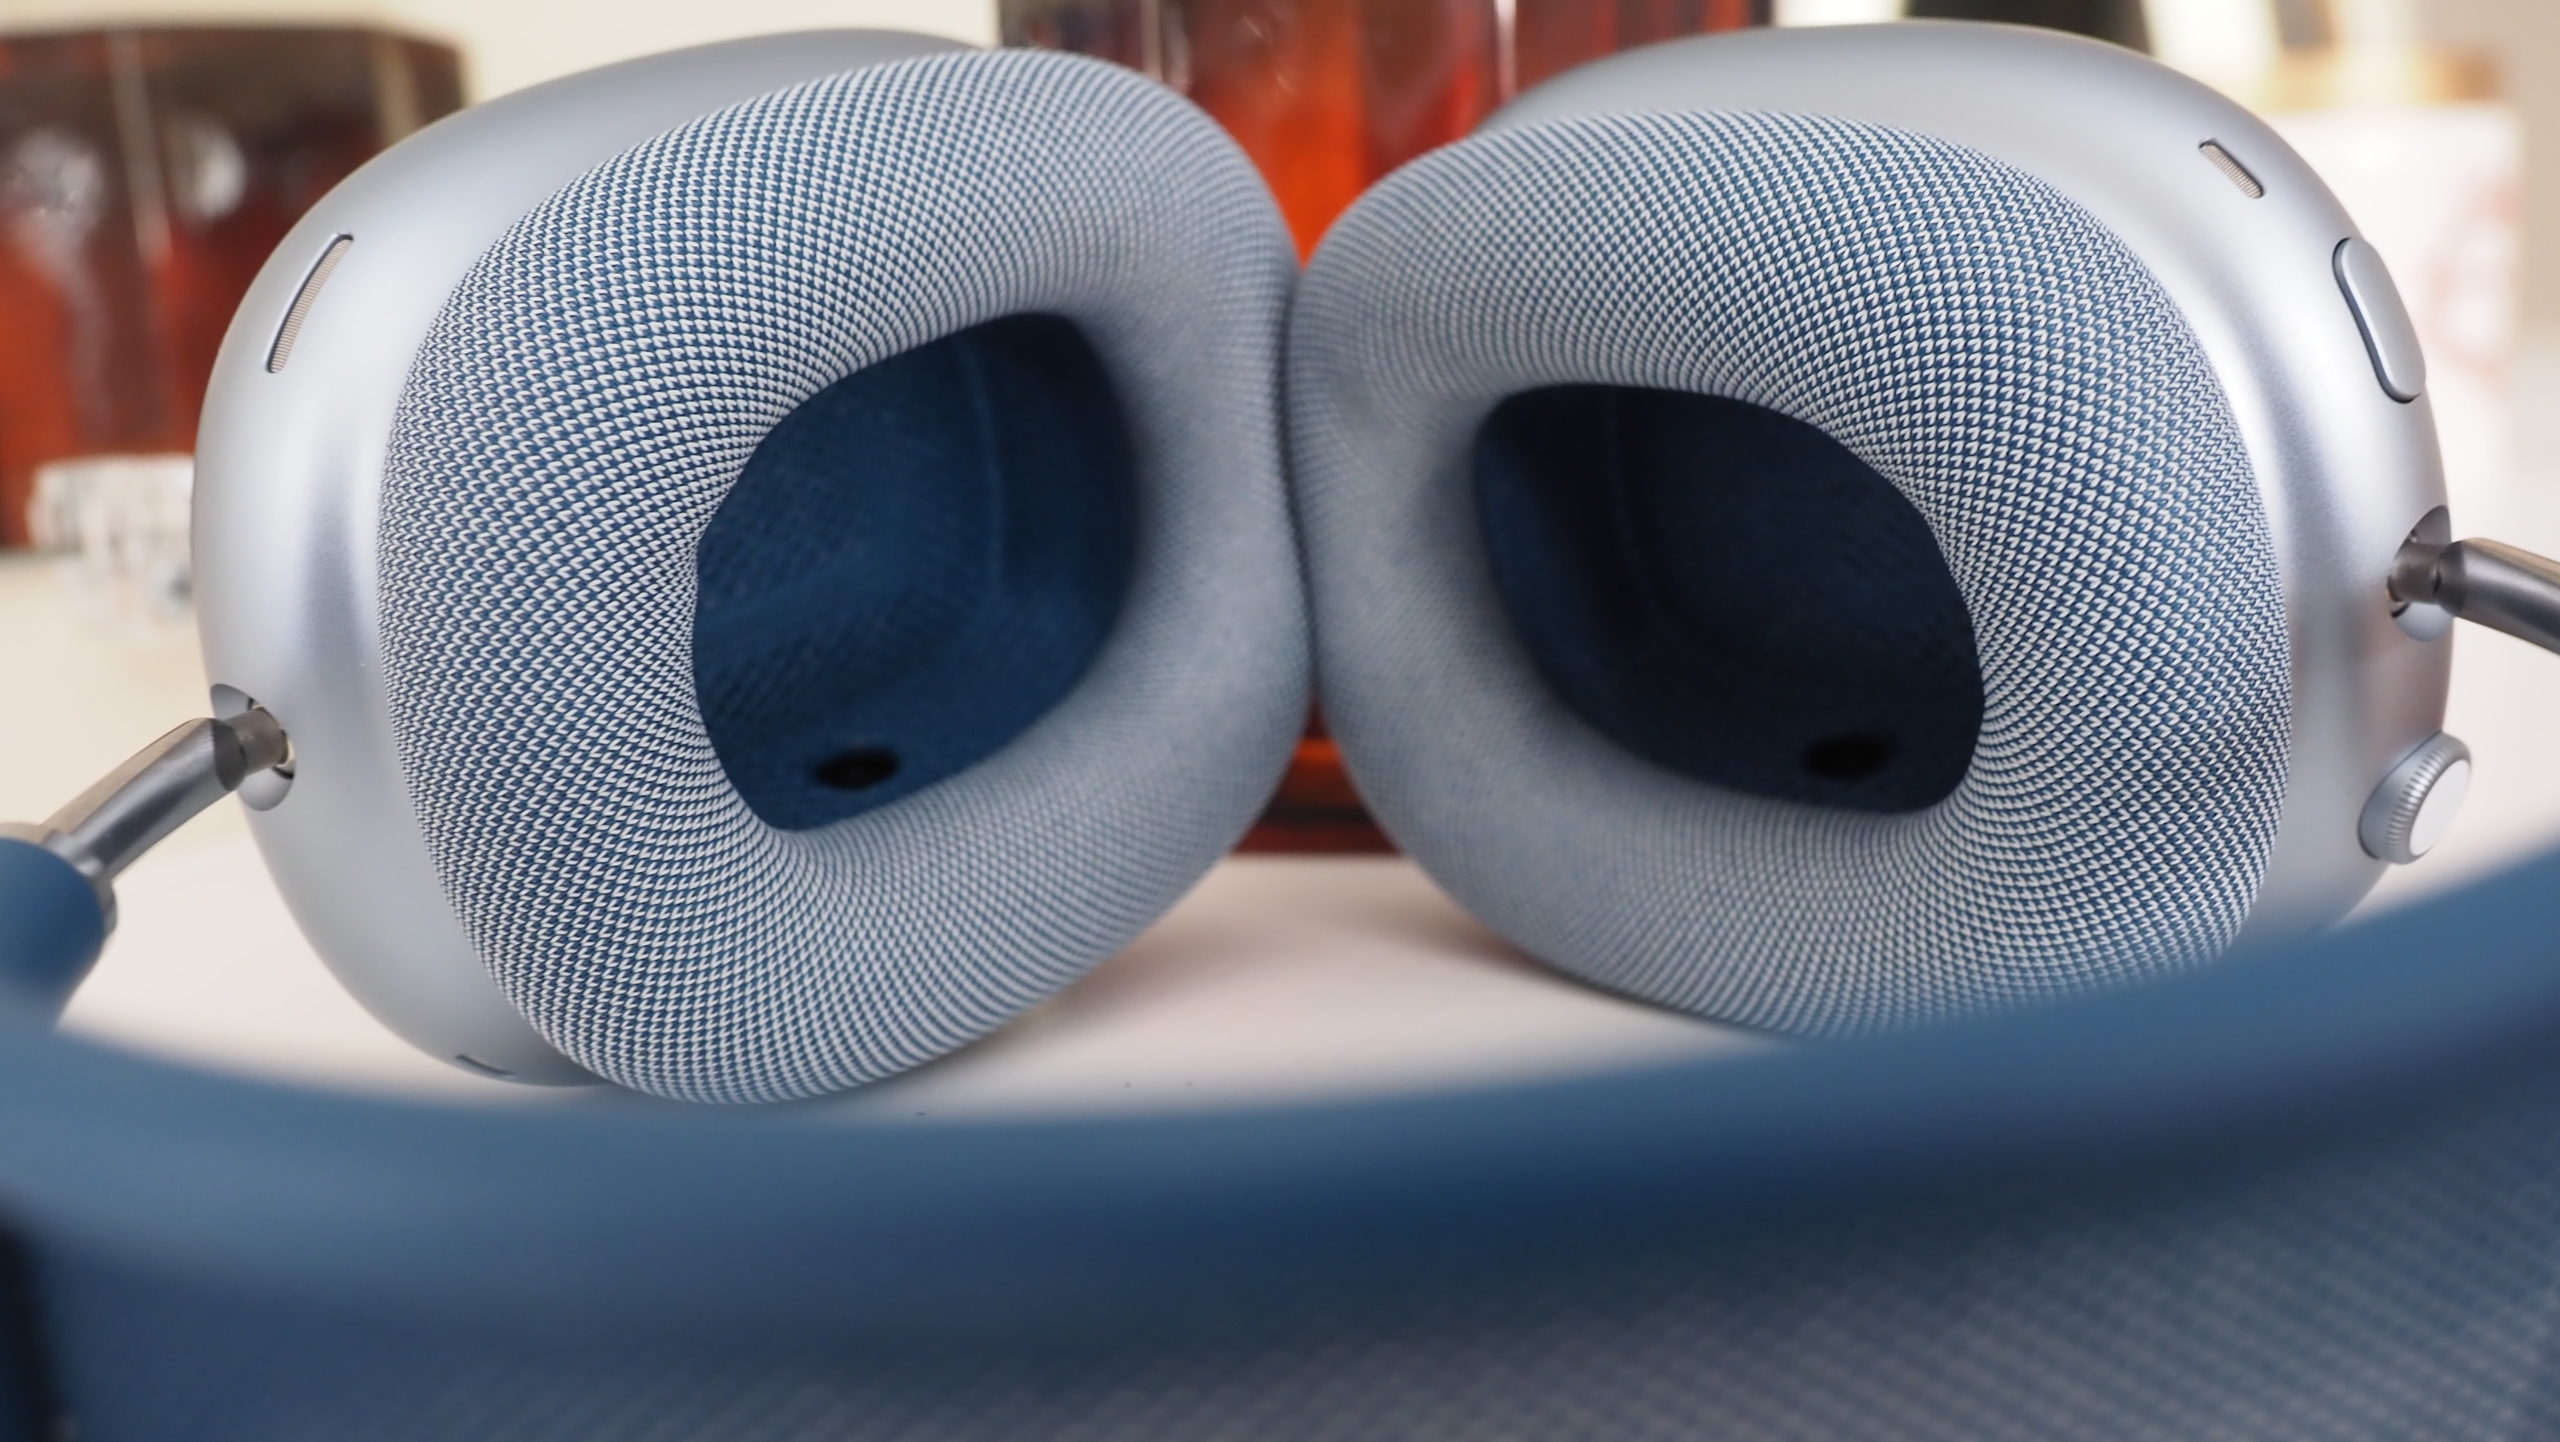 The earcups create a tight seal, and the sound is incredible. (Photo: Caitlin McGarry/Gizmodo)